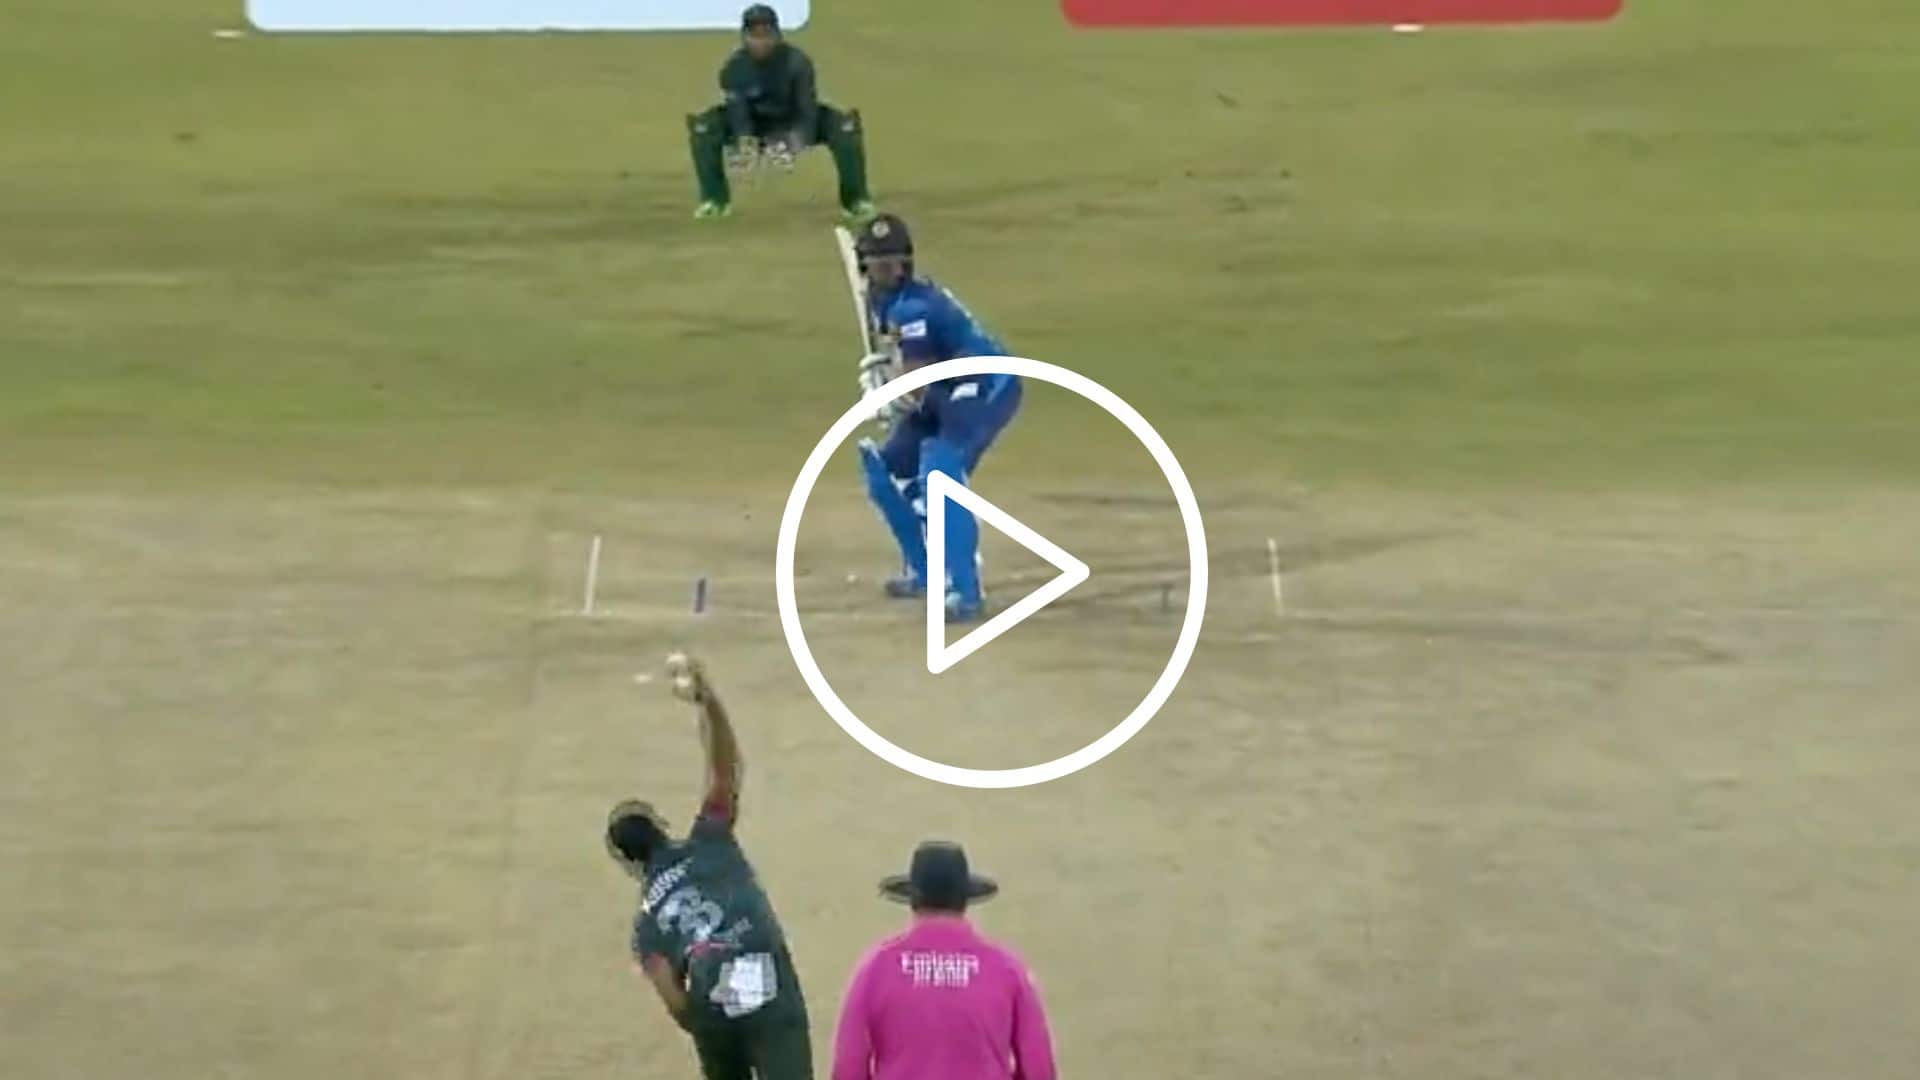 [Watch] Taskin Ahmed's Deadly Bouncer Hurts Theekshana And Sends Him Packing